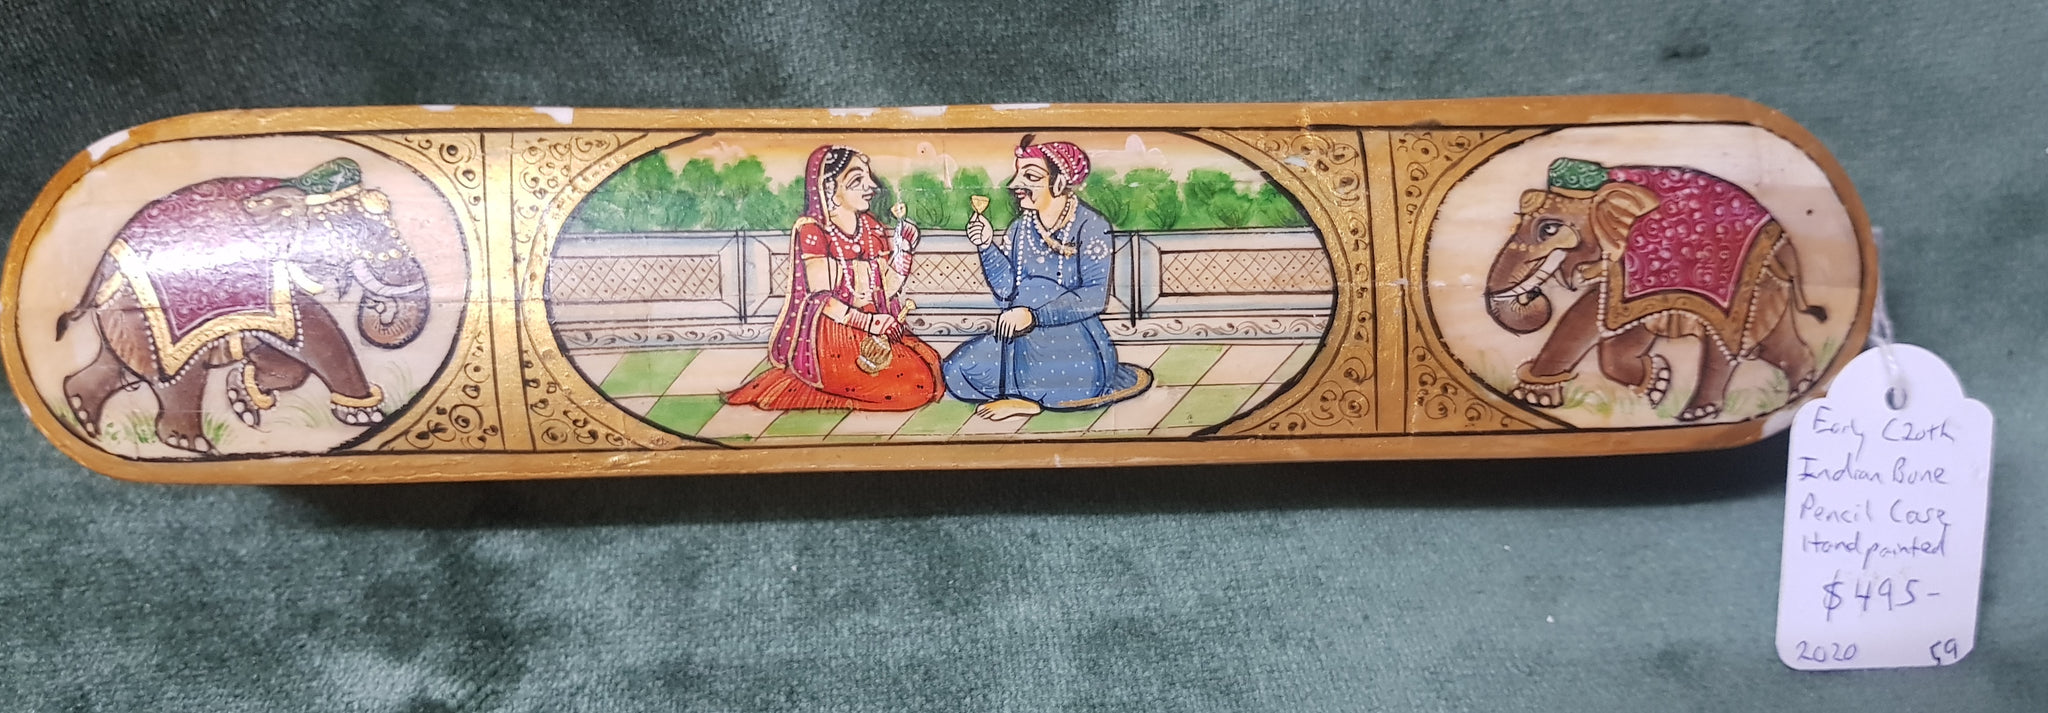 Indian painted + gilded pencil case Early c20th Bone 23.5cm long 4.5cm high 4.6cm wide #59